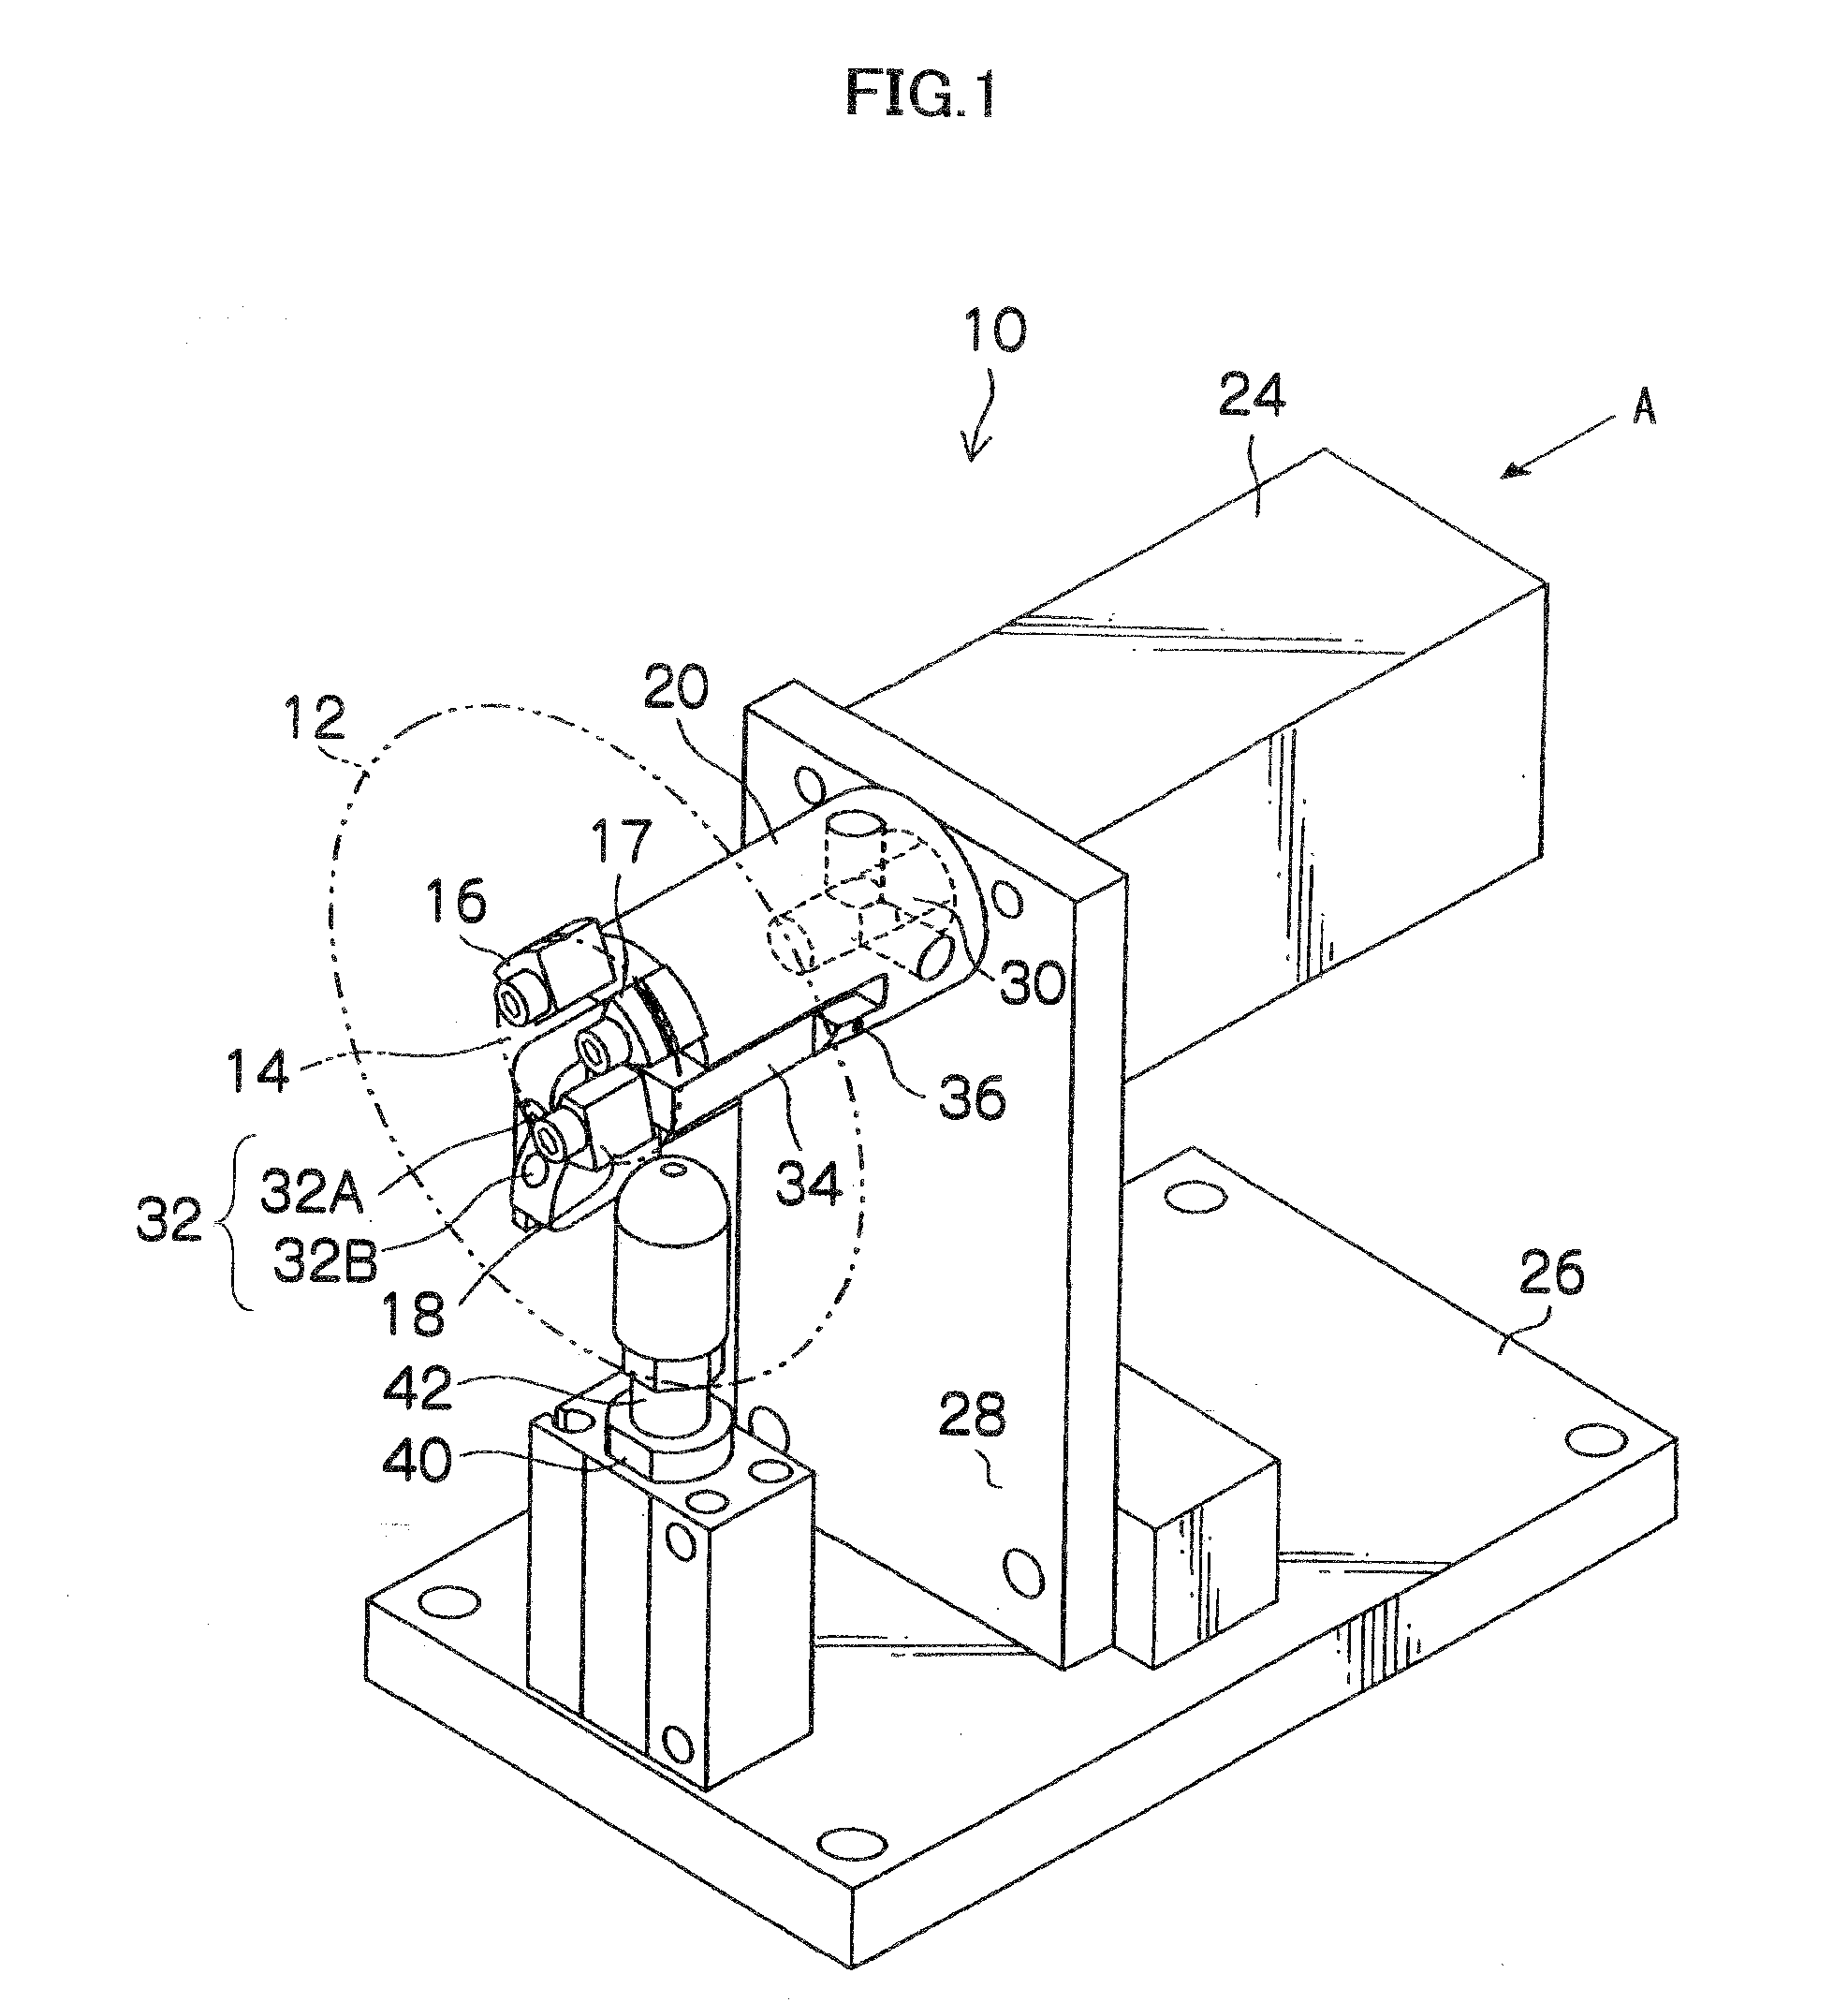 Disk inspection apparatus and method